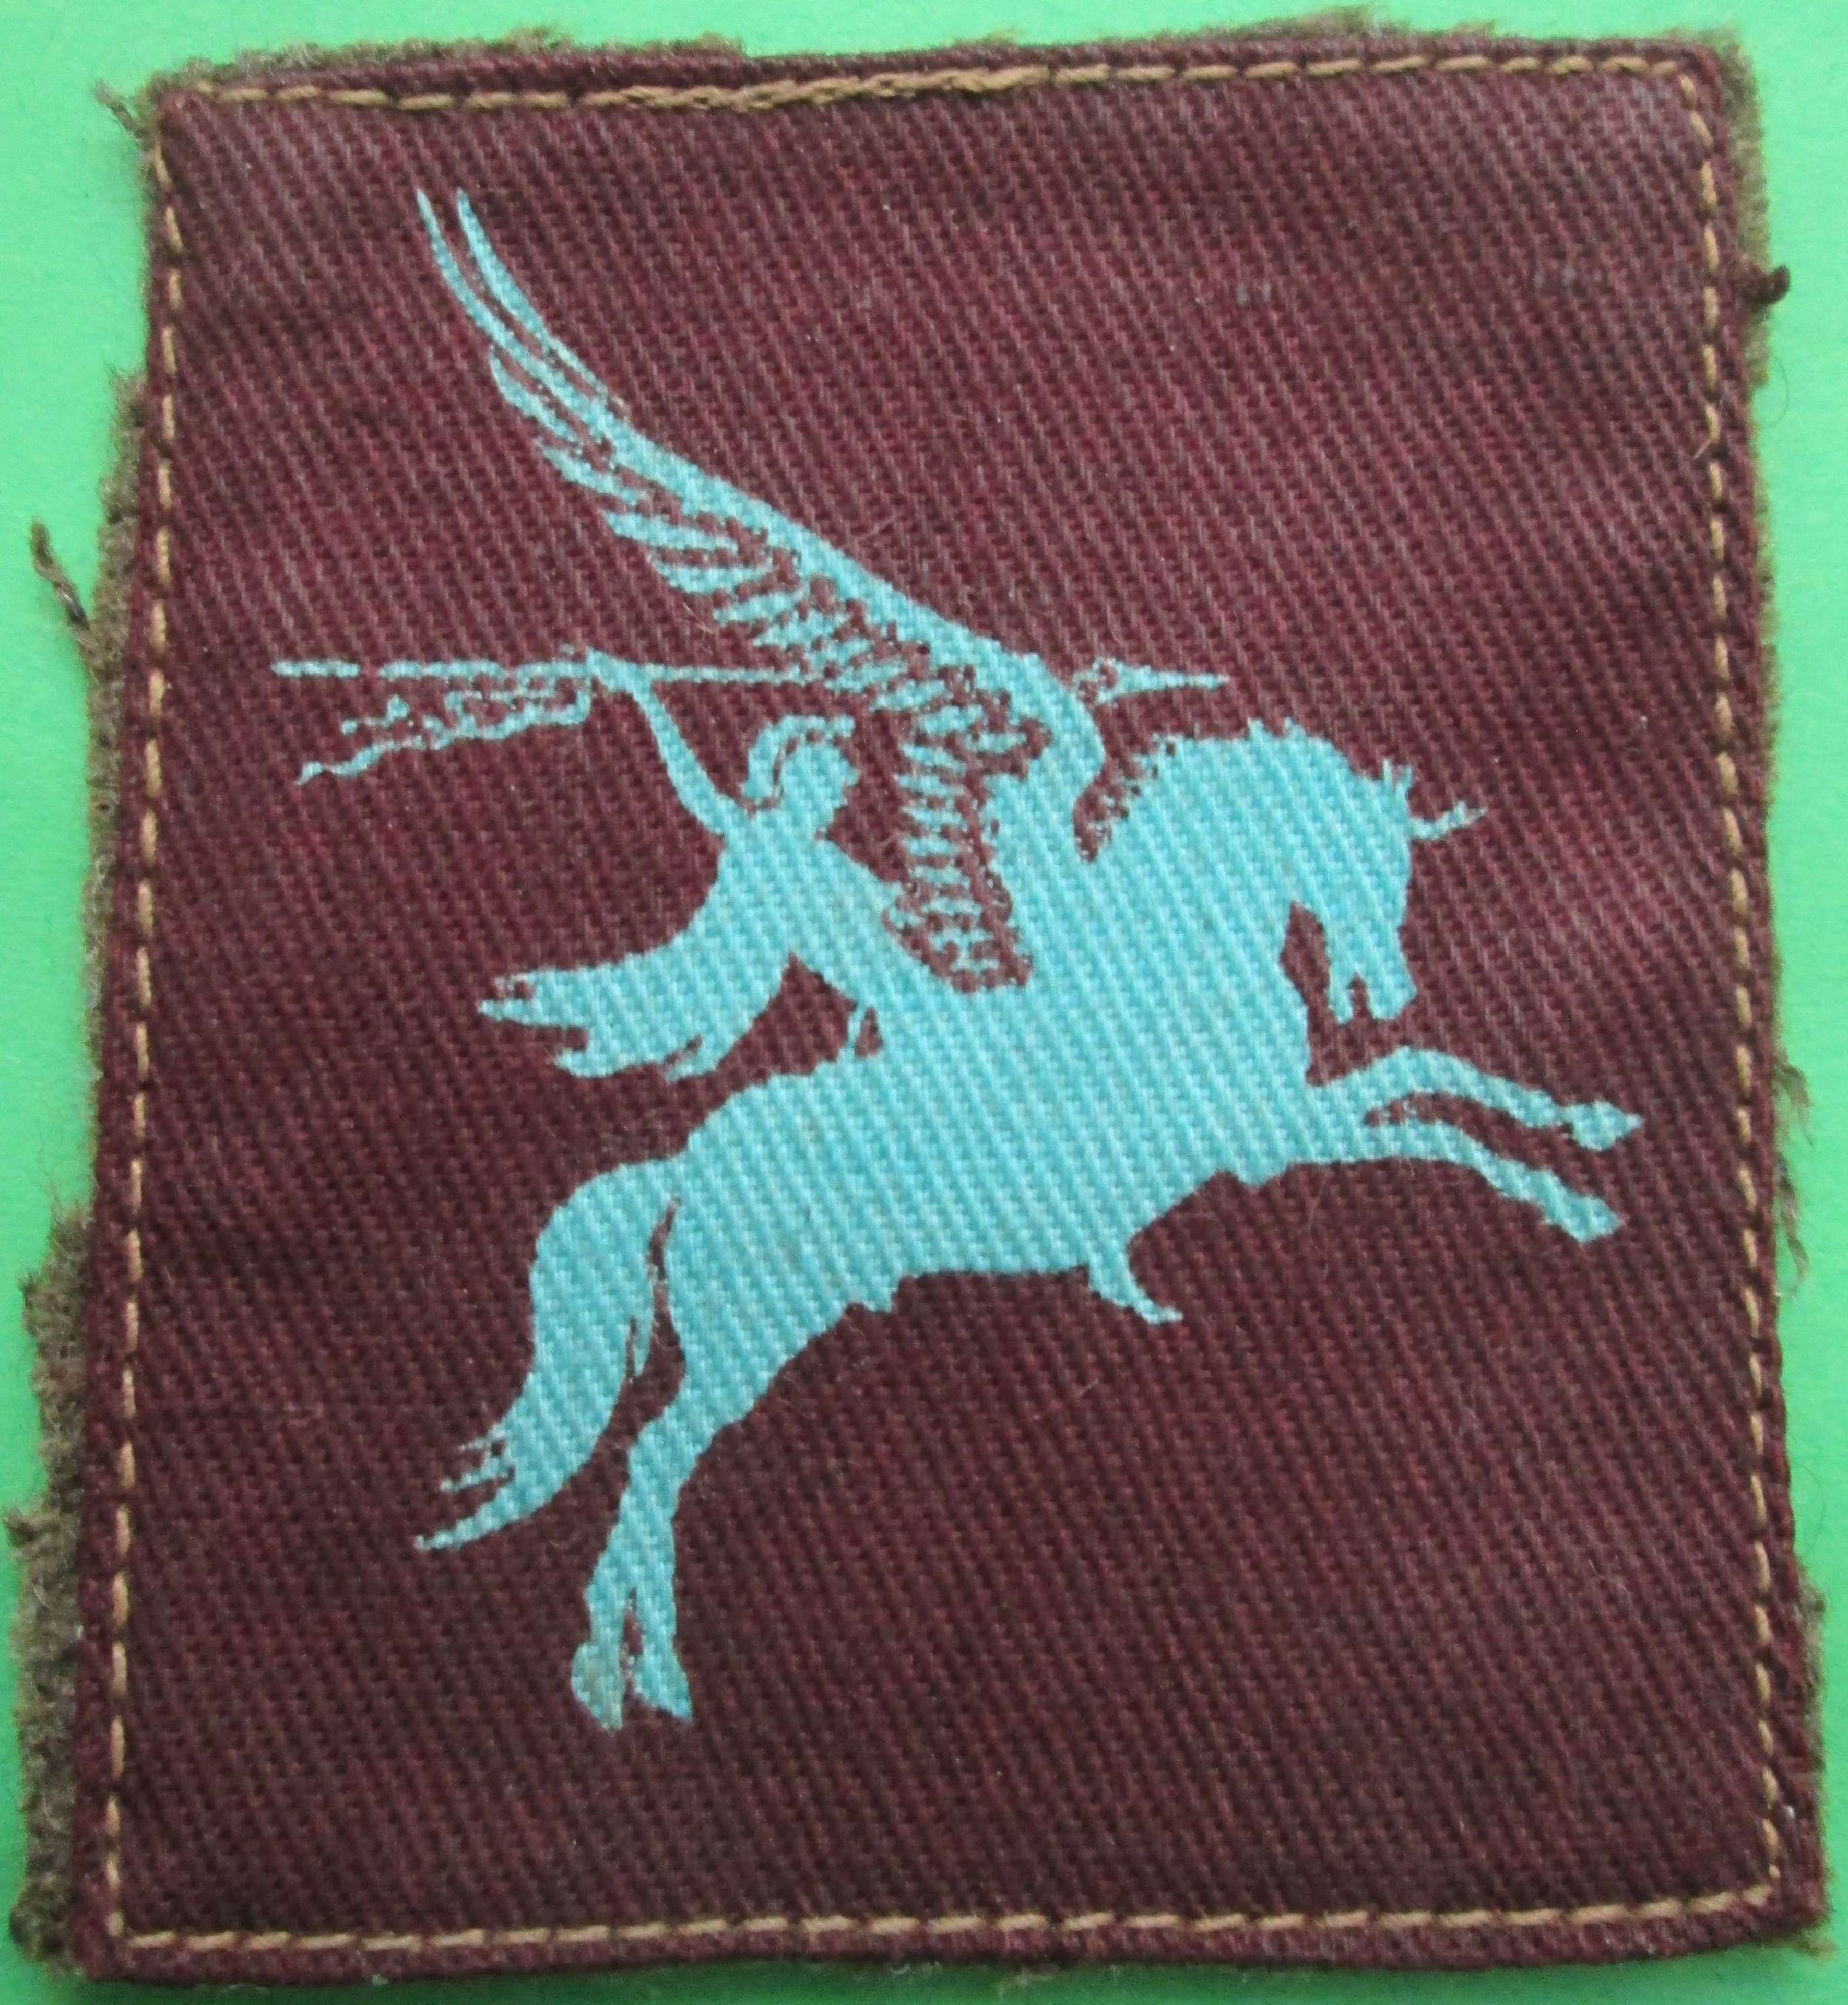 A WWII PRINTED PEGASUS PATCH